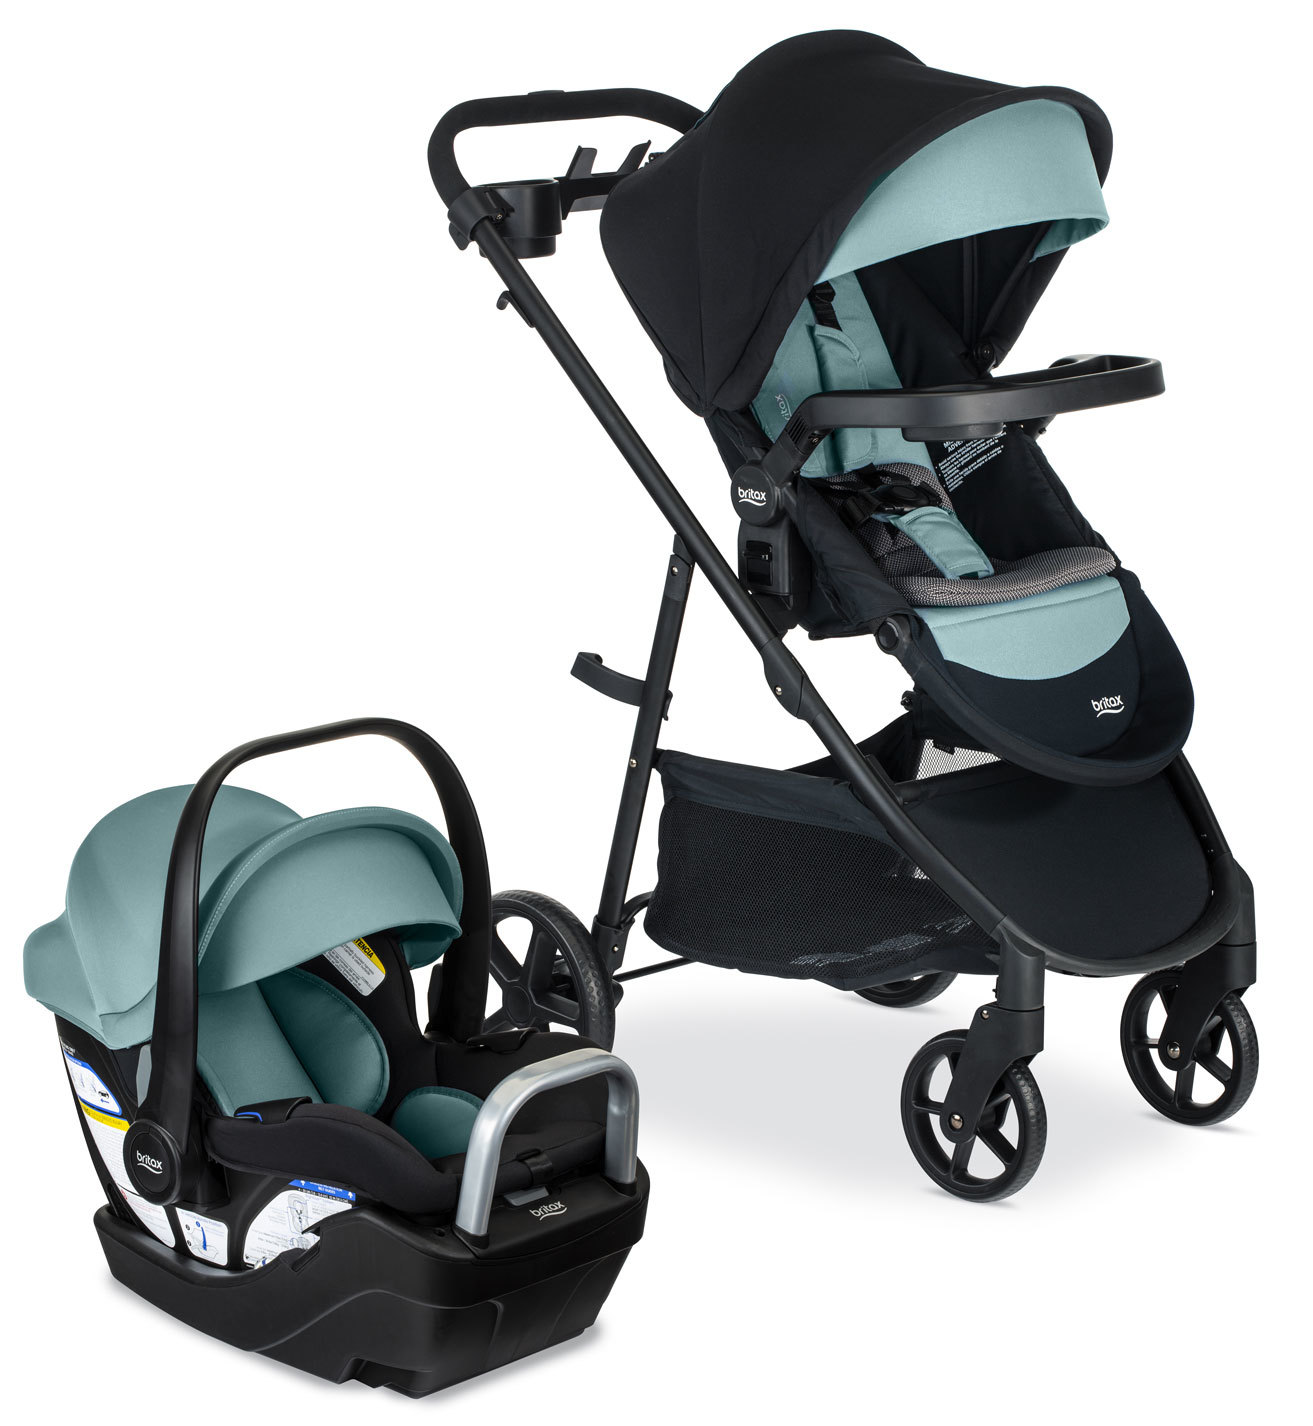 Willow Brook S+ Travel System in Jade Onyx fashion